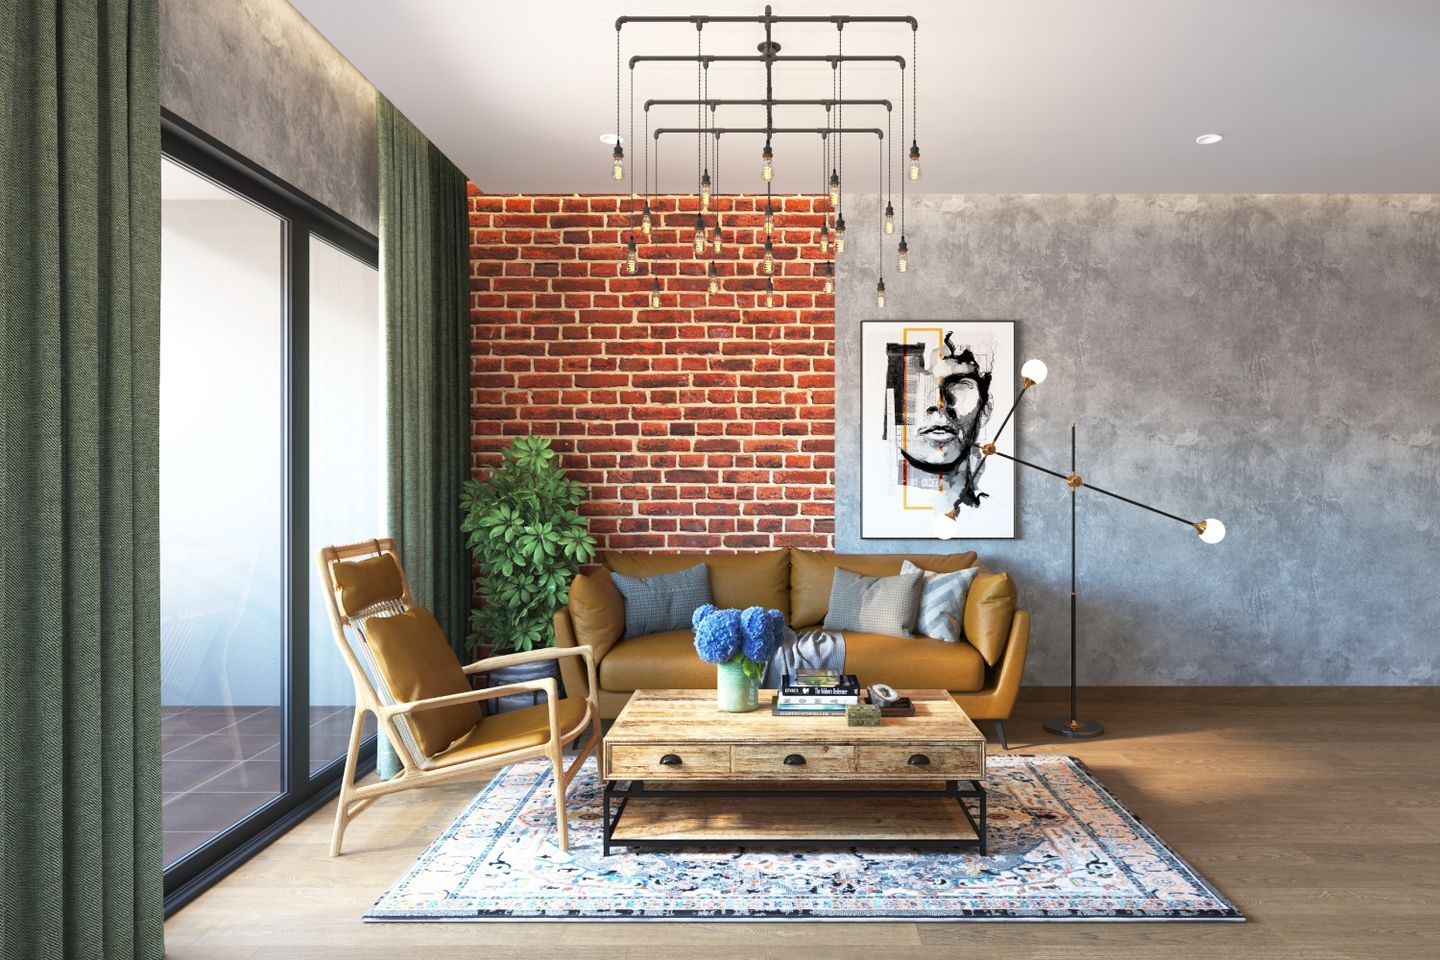 Contemporary Living Room Design With Red Brick Wall - Livspace